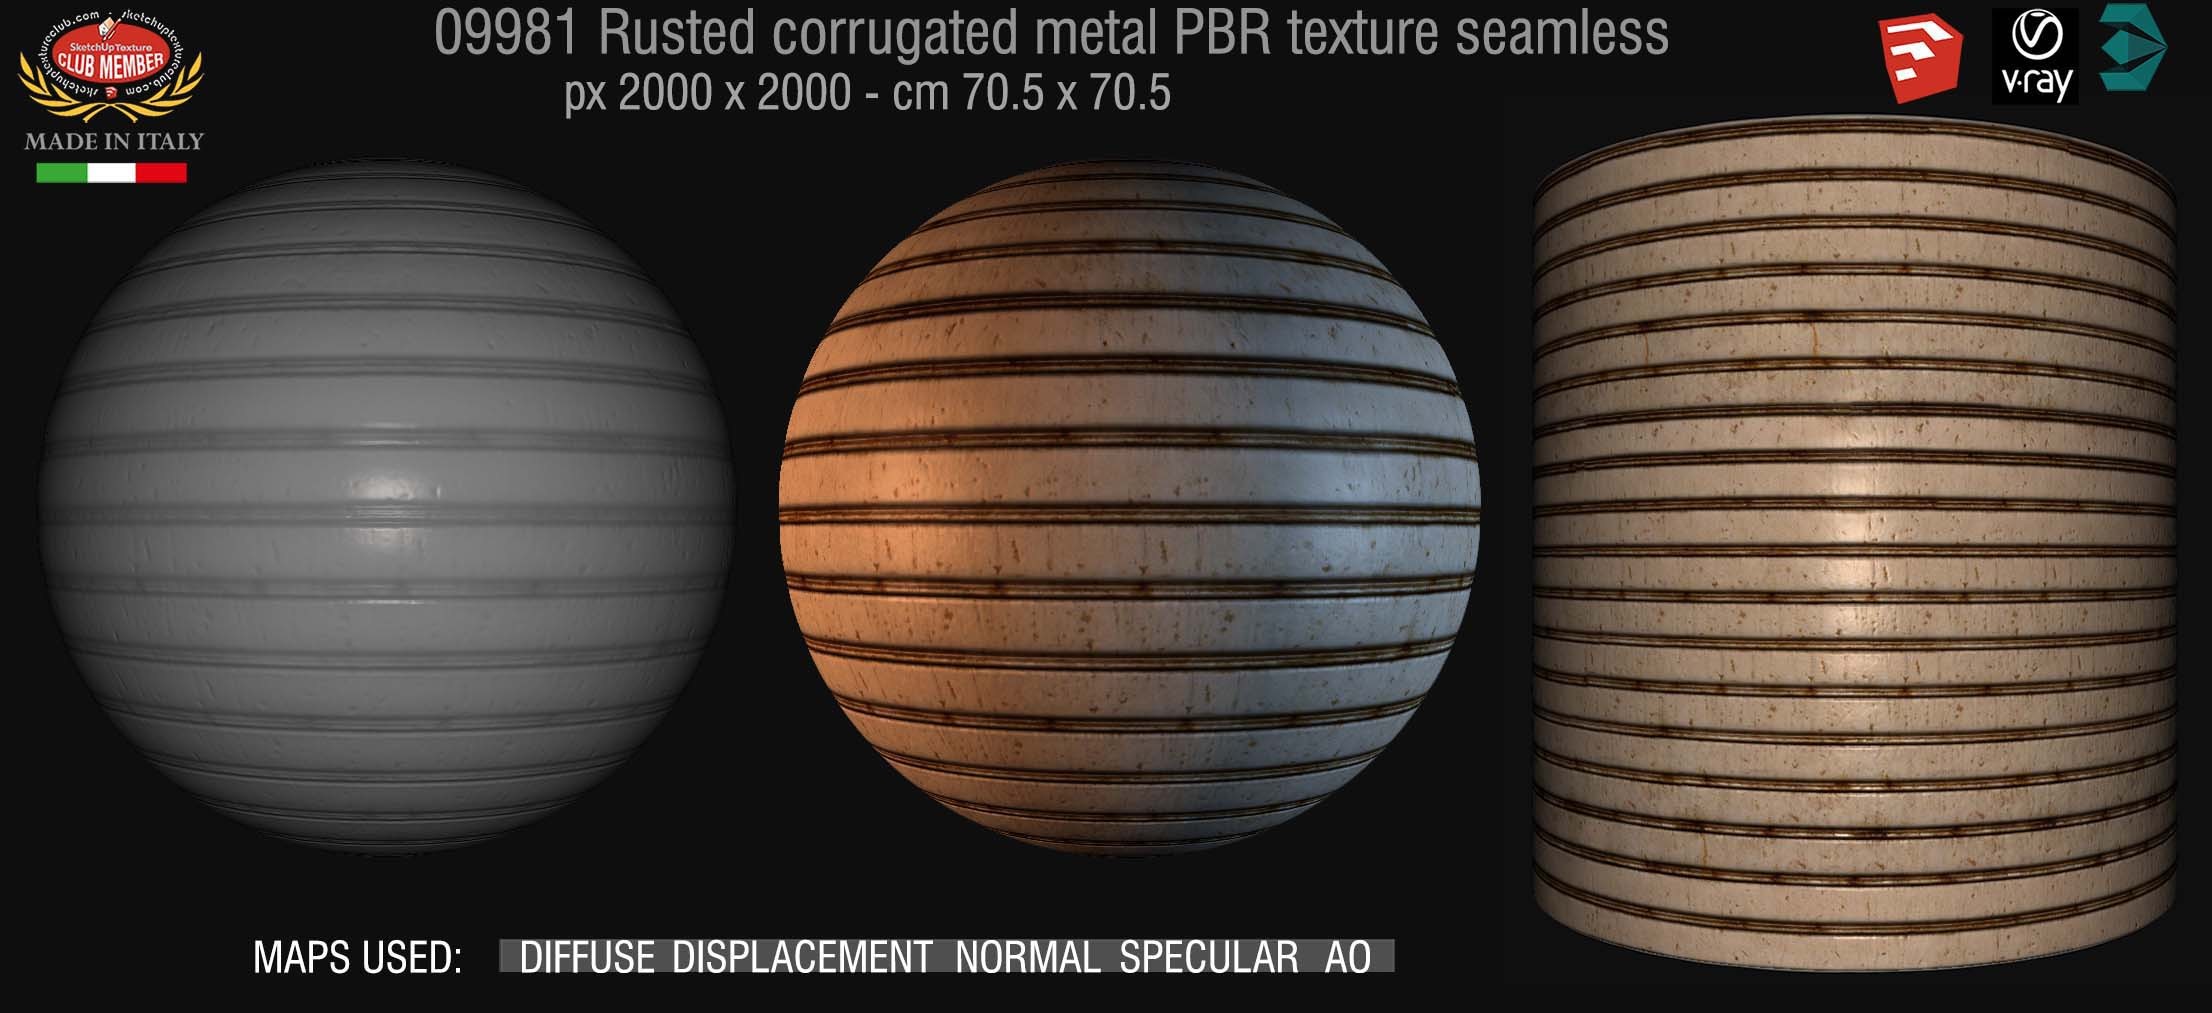 09981 Rusted corrugated metal PBR texture seamless DEMO